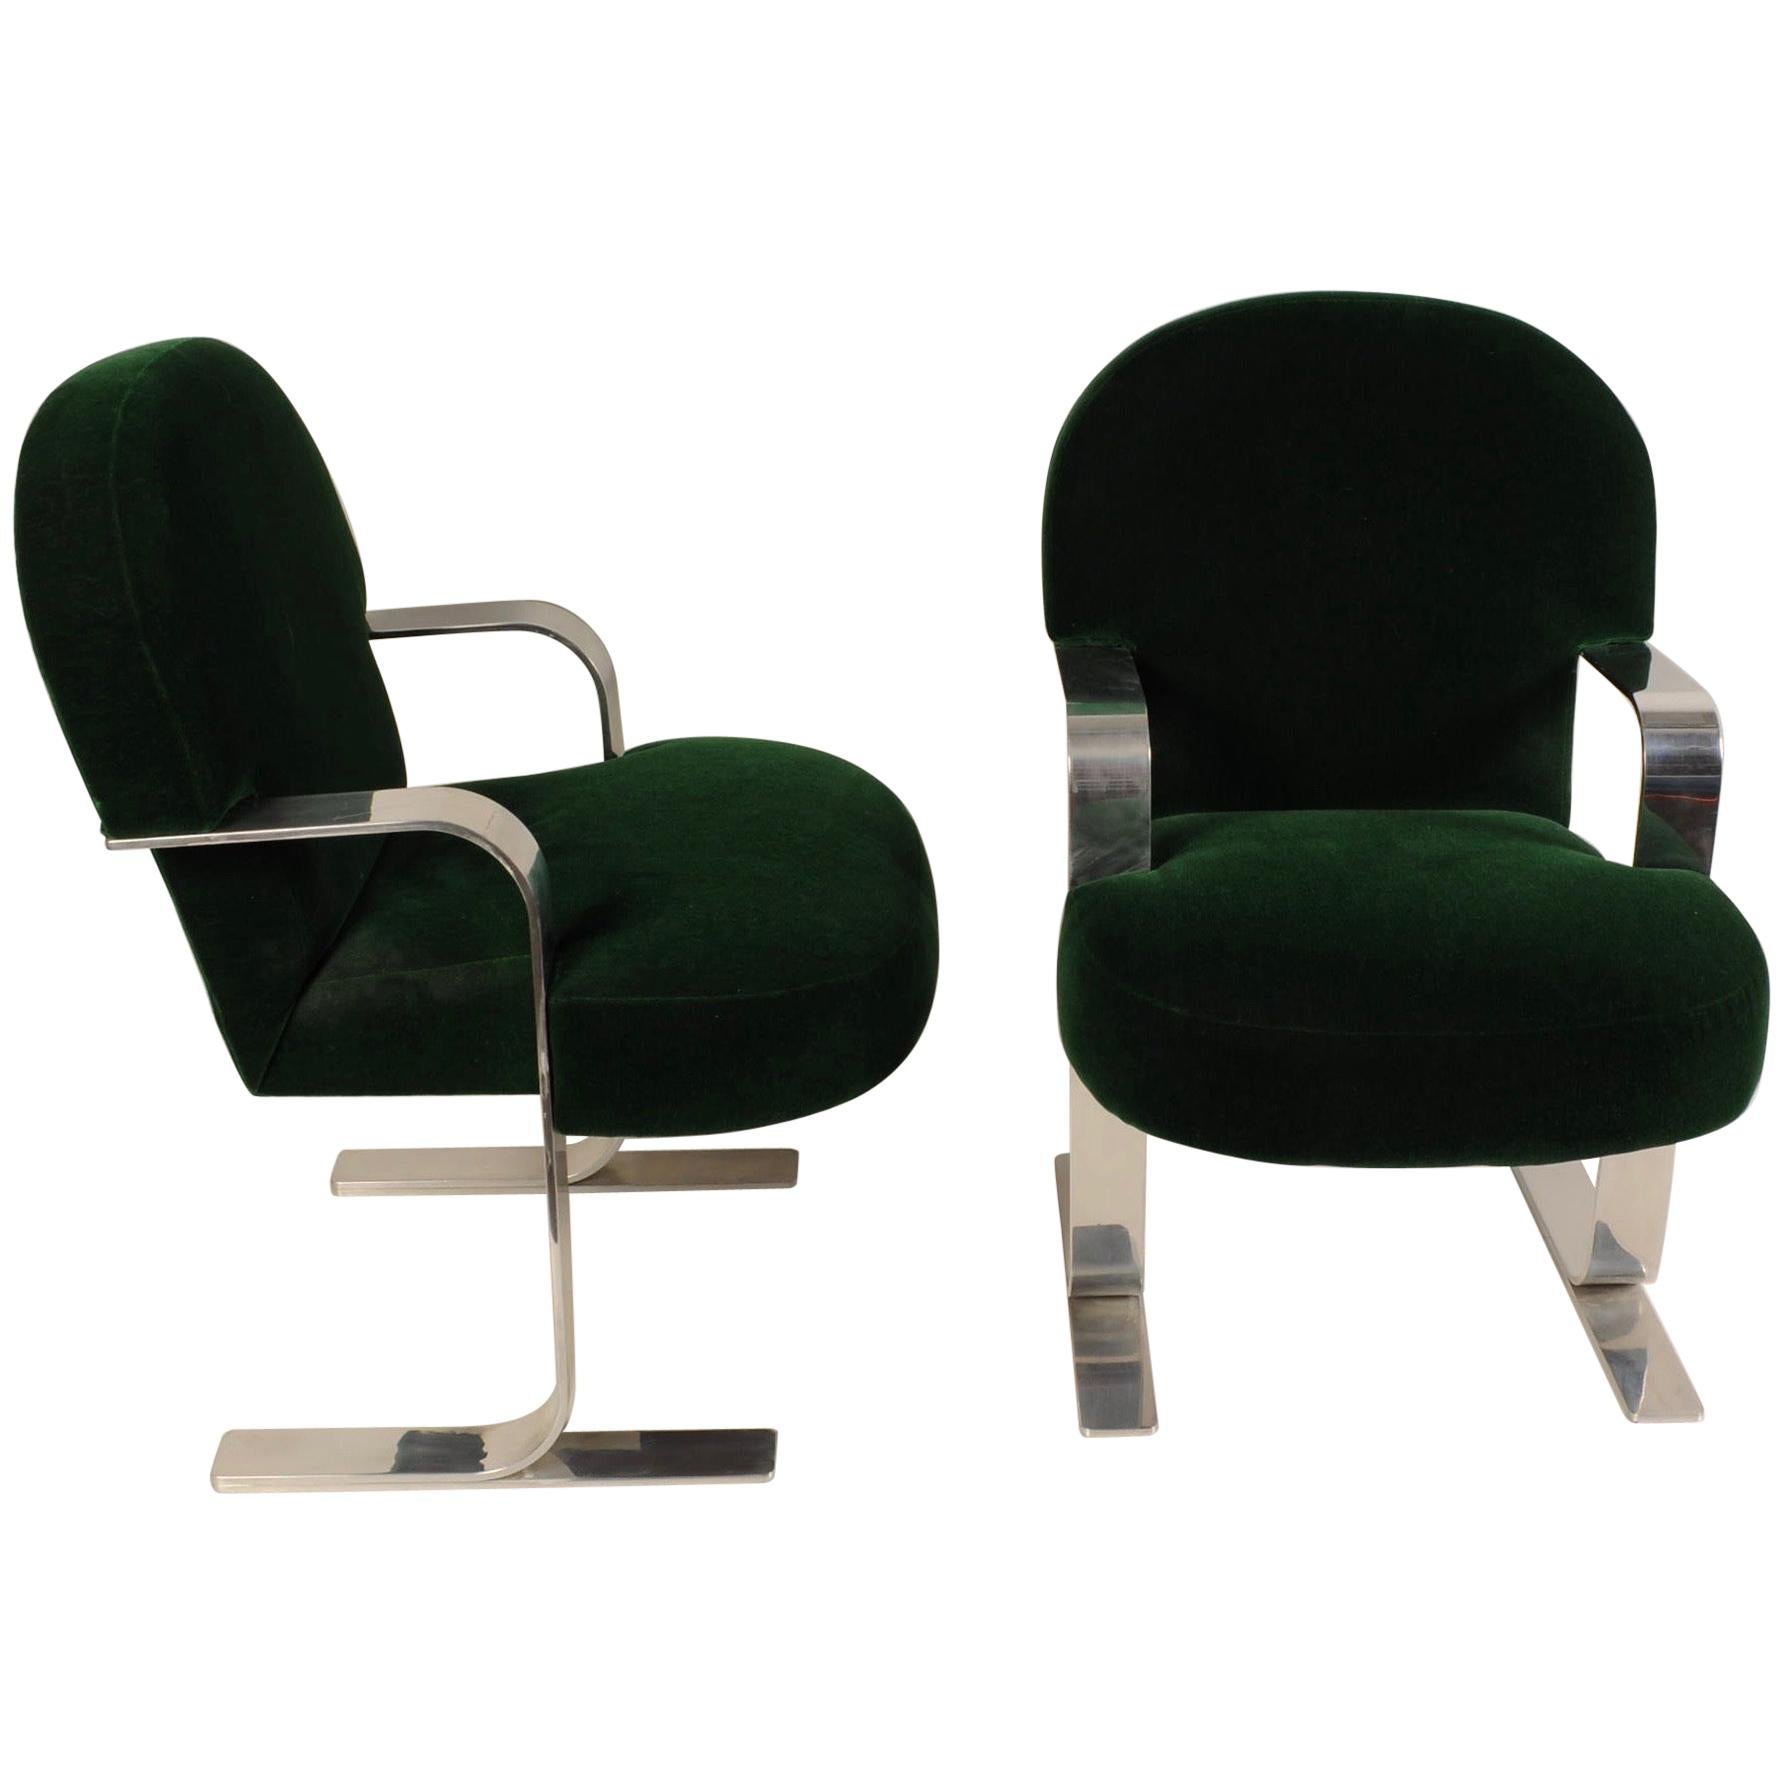 Mid-Century Modern Cantilevered Chairs